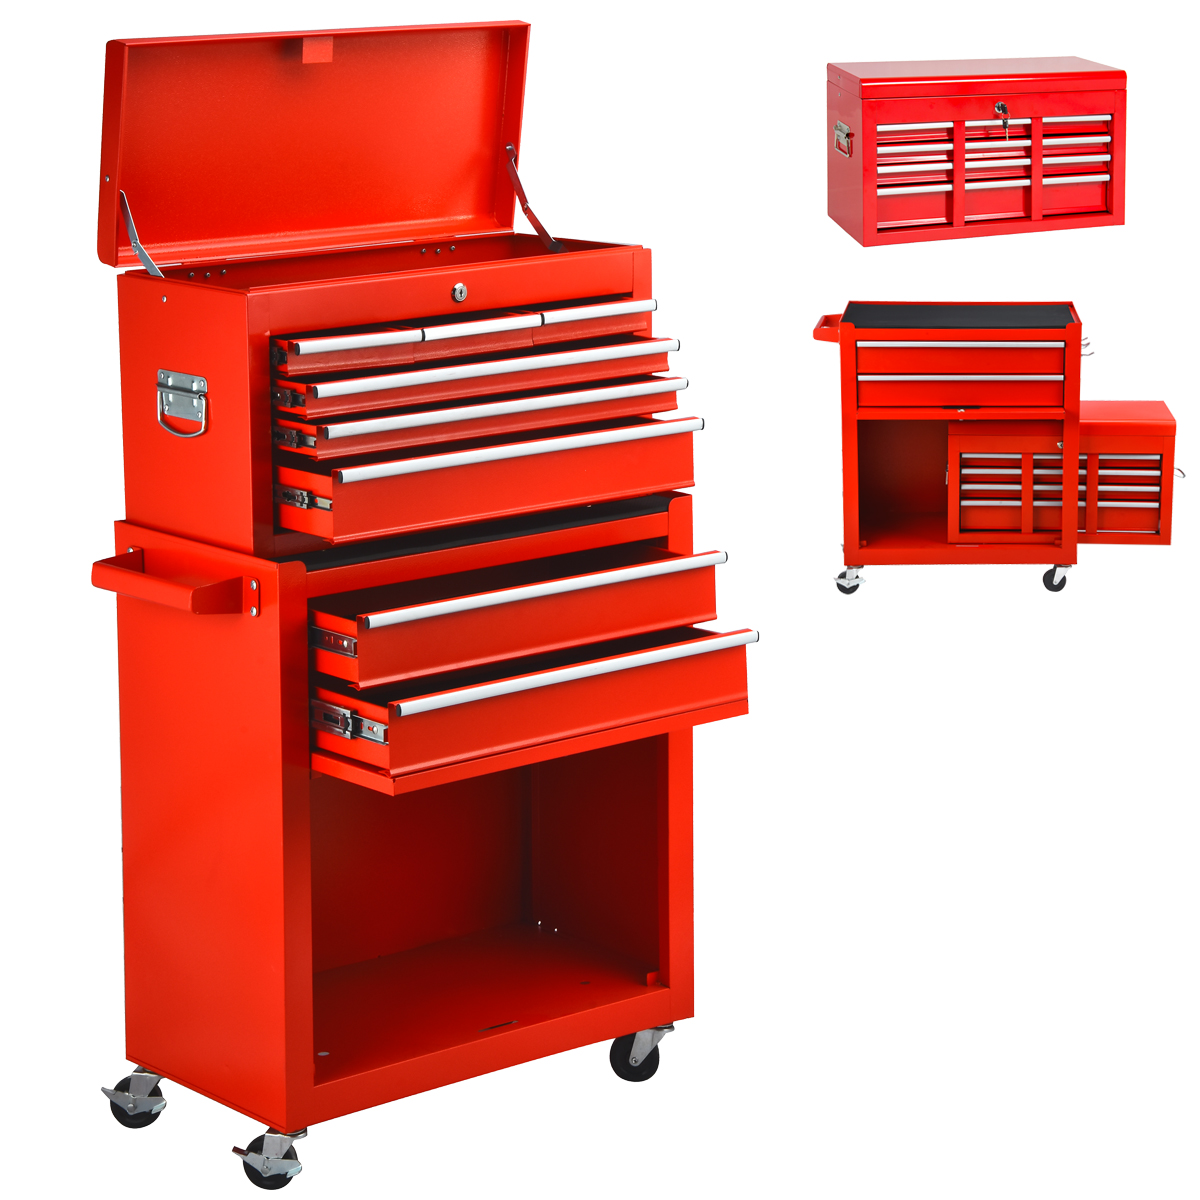 Odaof 8 Drawer Mechanic Tool Chest with Wheels Heavy Duty Rolling Tool Box Cabinet with Riser Sliding Drawers Keyed Locking System Top Detachable Toolbox Organizer for Workshop Red - image 1 of 9